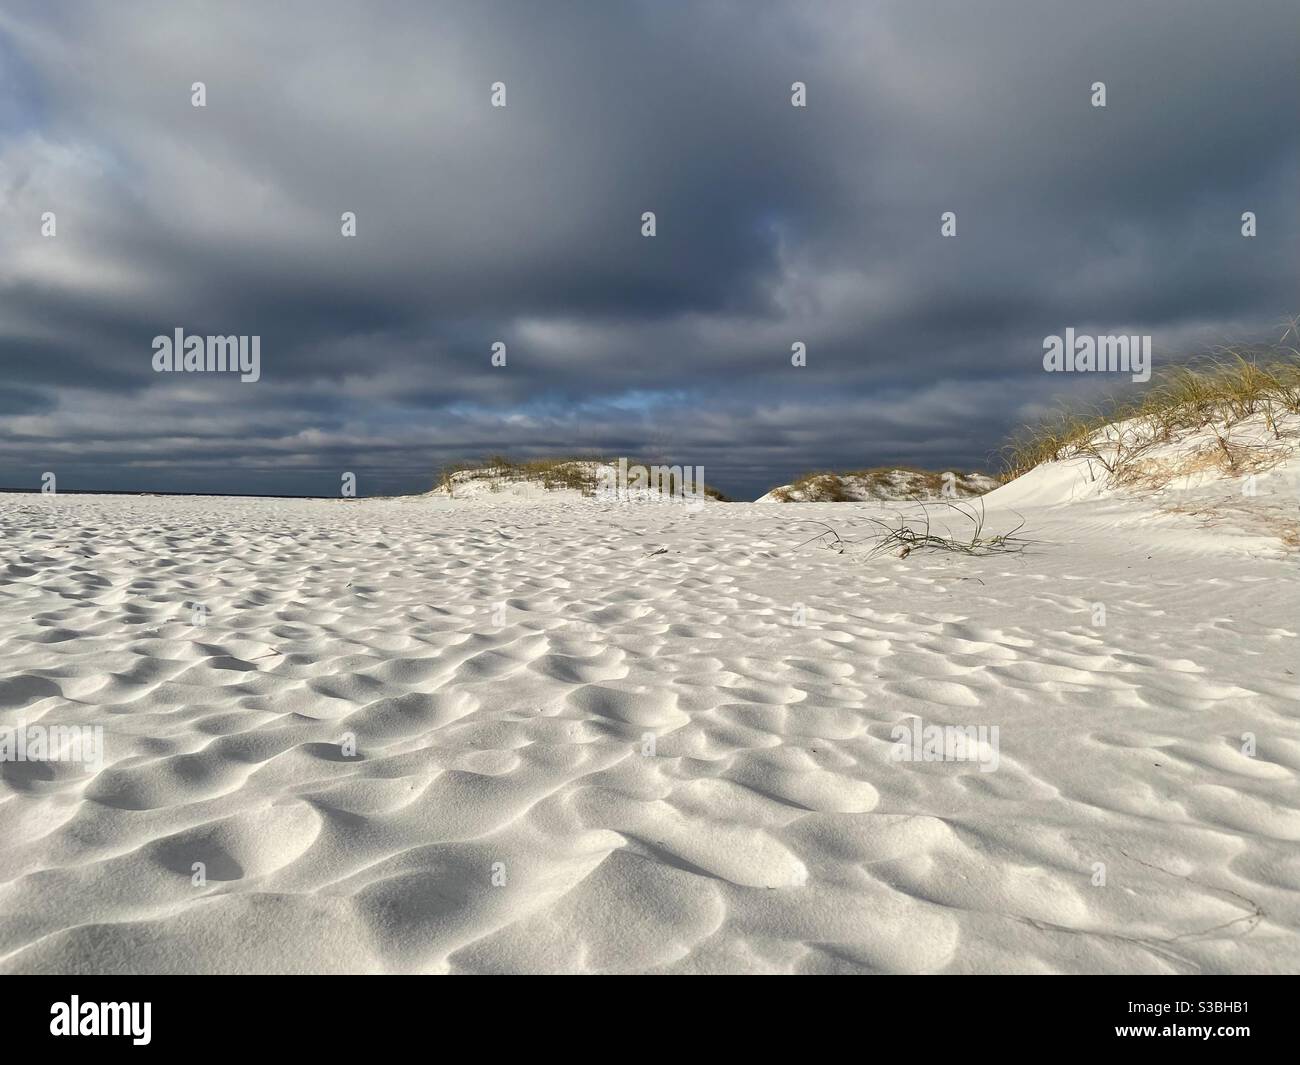 Low perspective of white sand textures on Florida beach Stock Photo